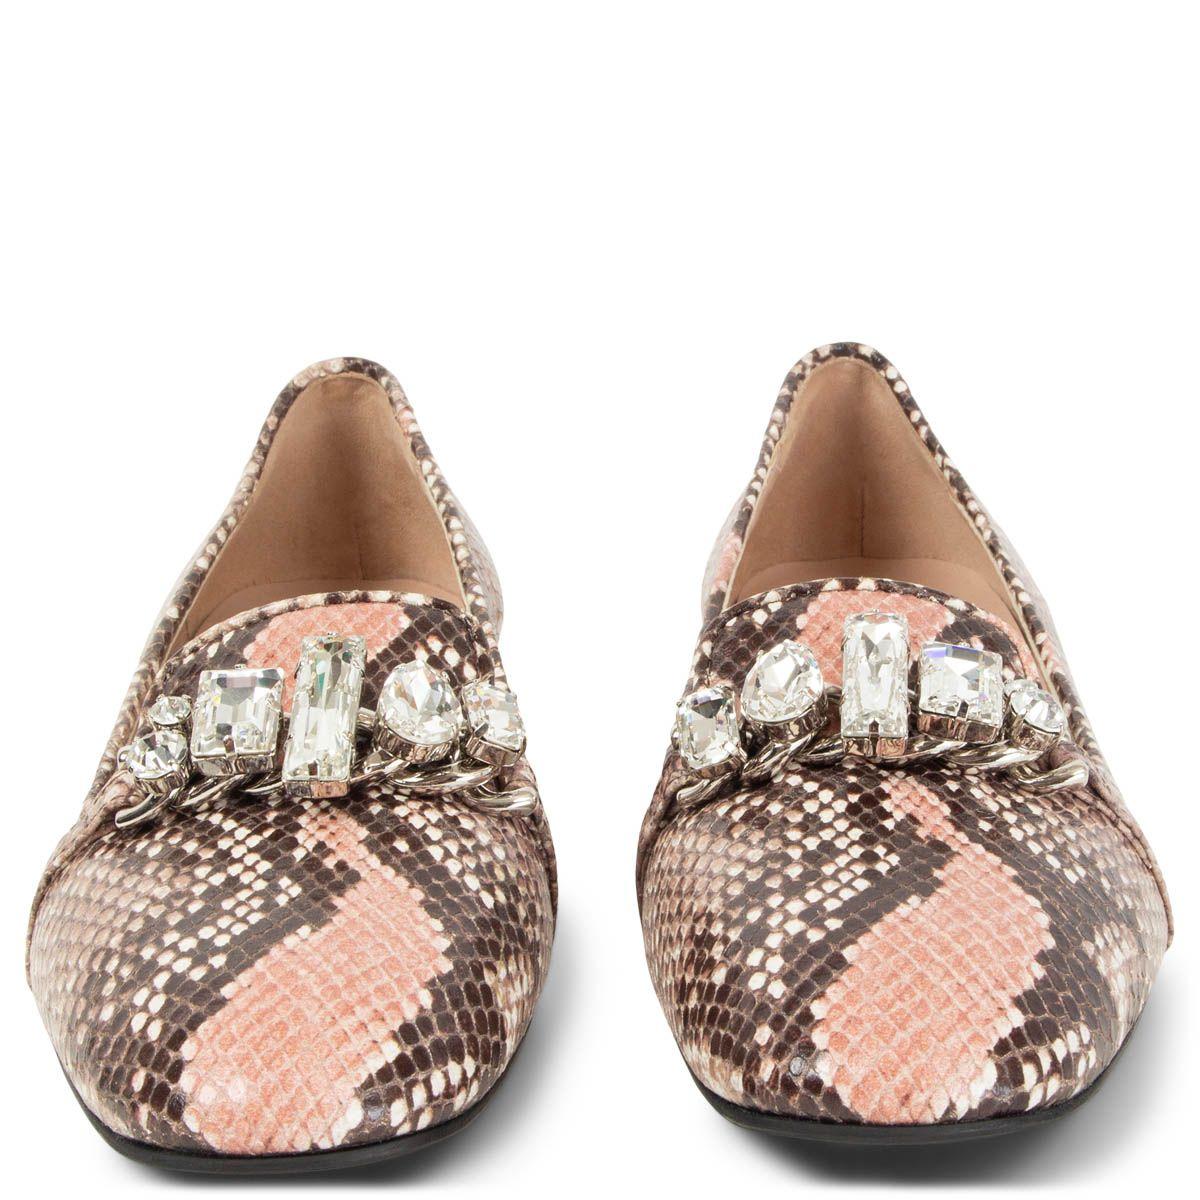 100% authentic Miu Miu loafers in dusty rose, taupe and dark brown snakeskin embossed leather with clear crystal embellishment. Have been worn once inside and are in virtually new condition. Come with dust bag. 

Measurements
Imprinted